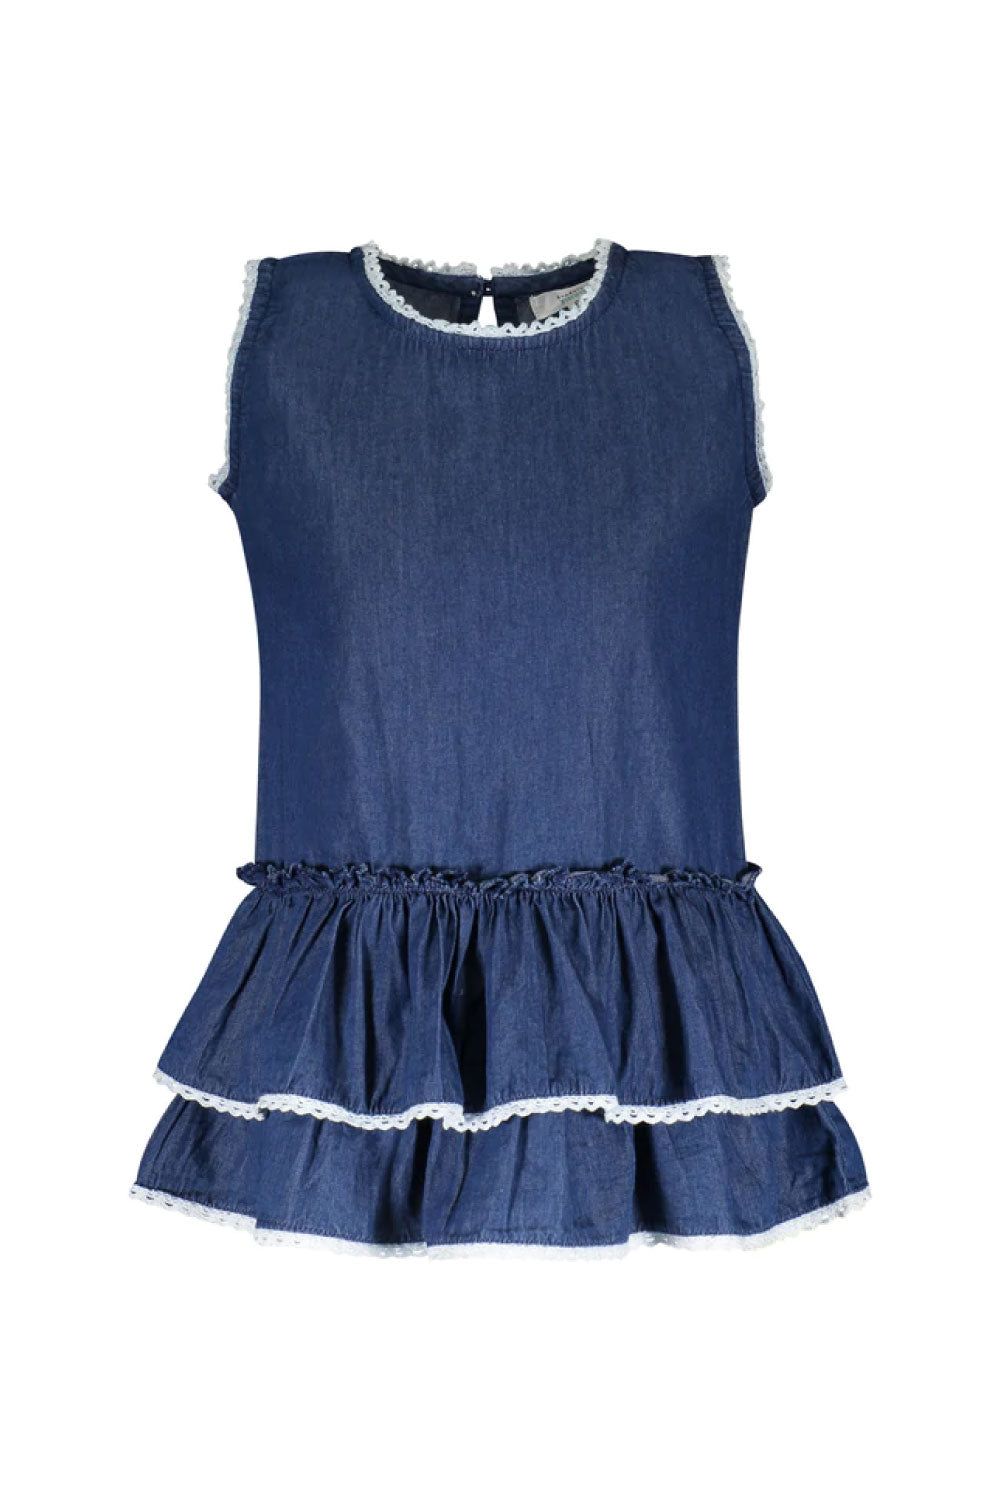 Image of the front of the Clementina Denim Dress.